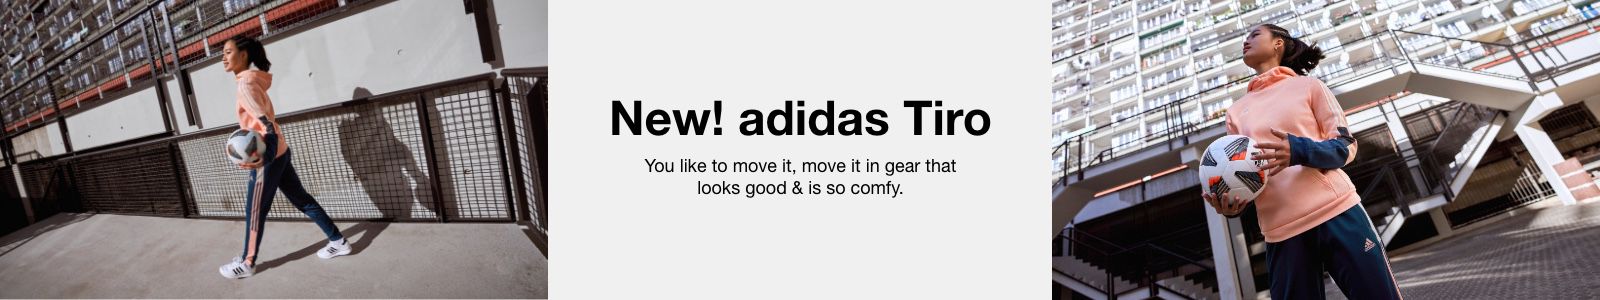 New! adidas Tiro, You like to move it, move it in gear that looks good and is so comfy